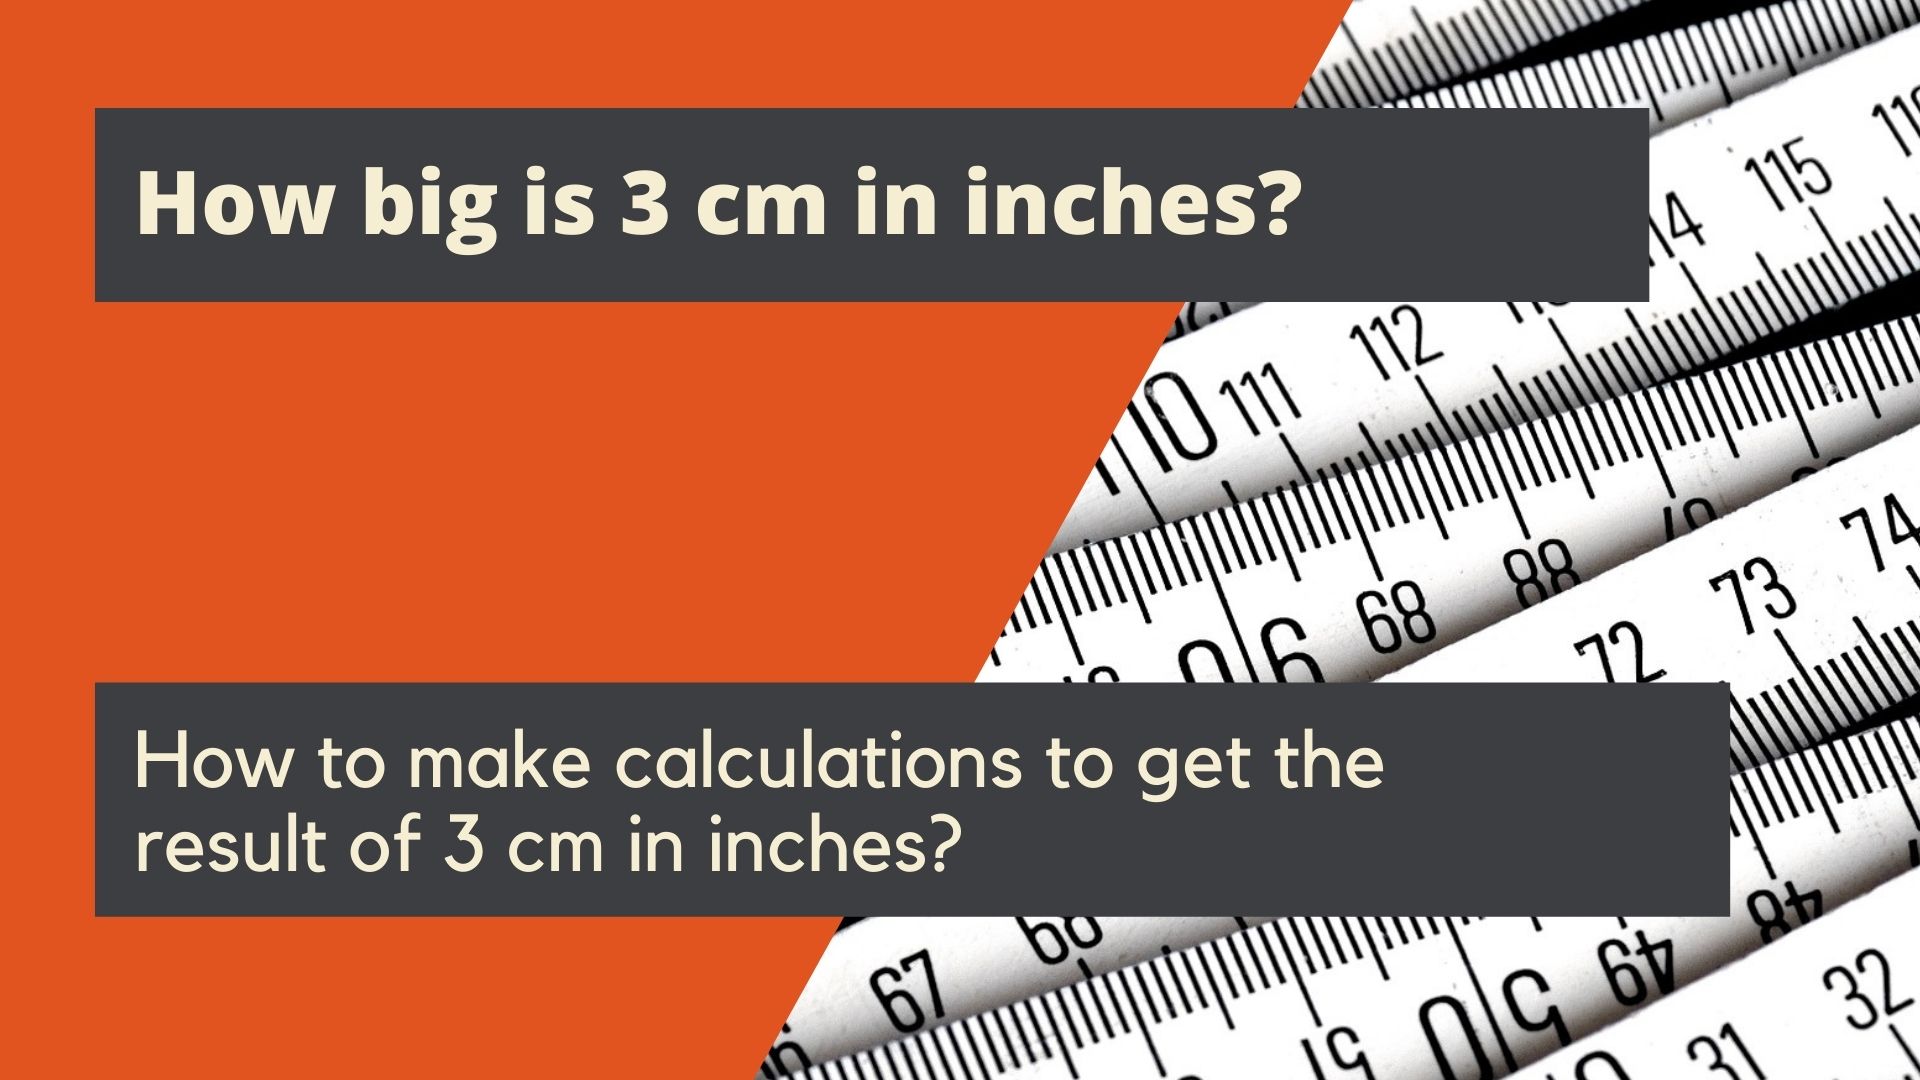 How big is 3 cm in inches?